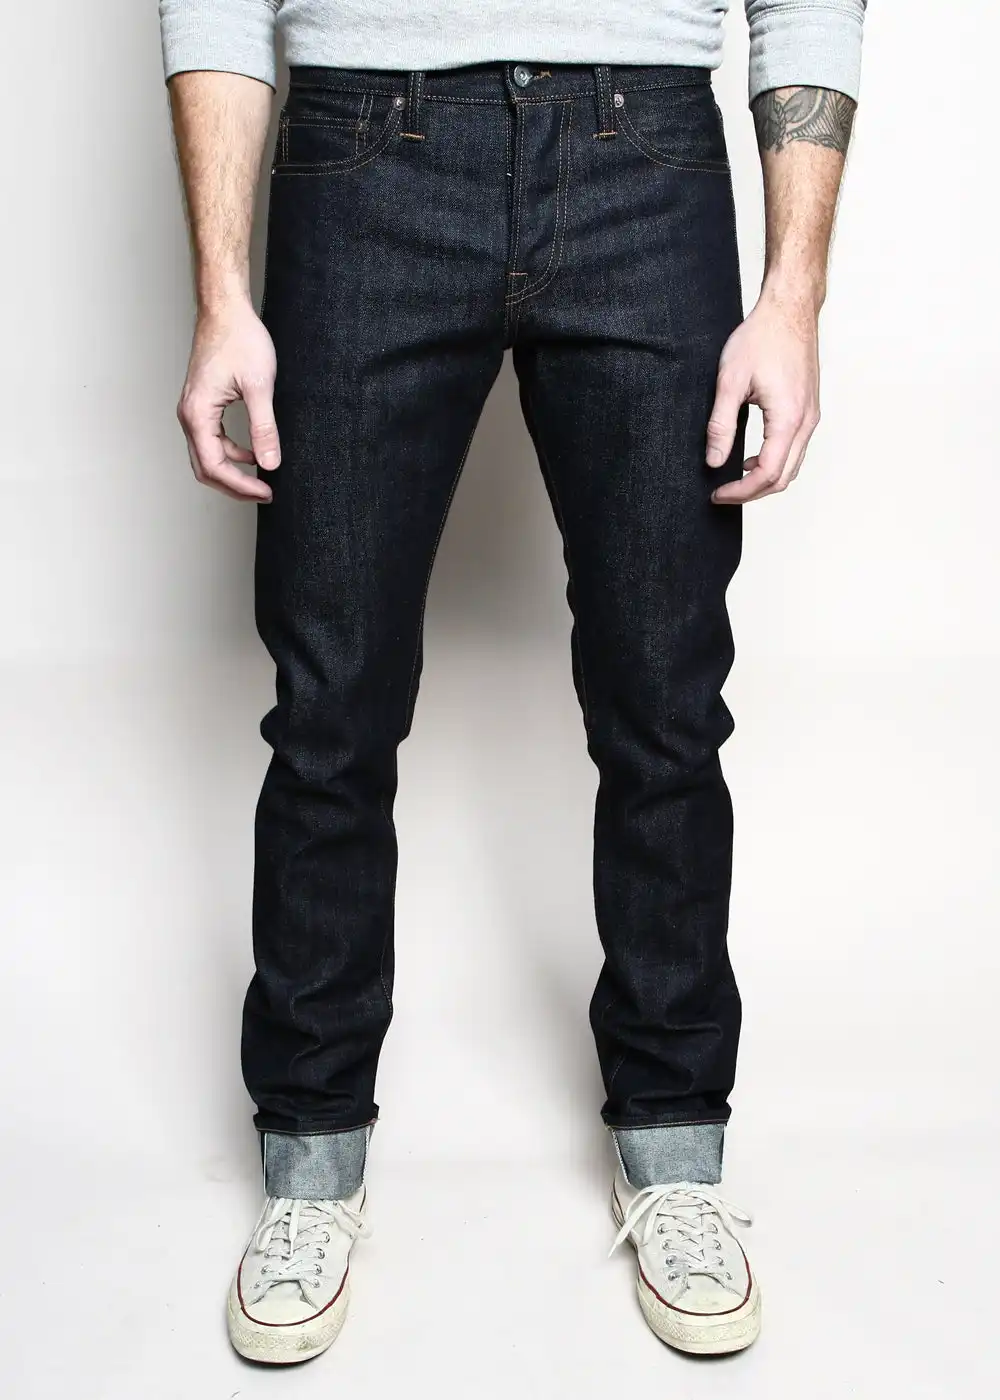 Rogue Territory Jeans